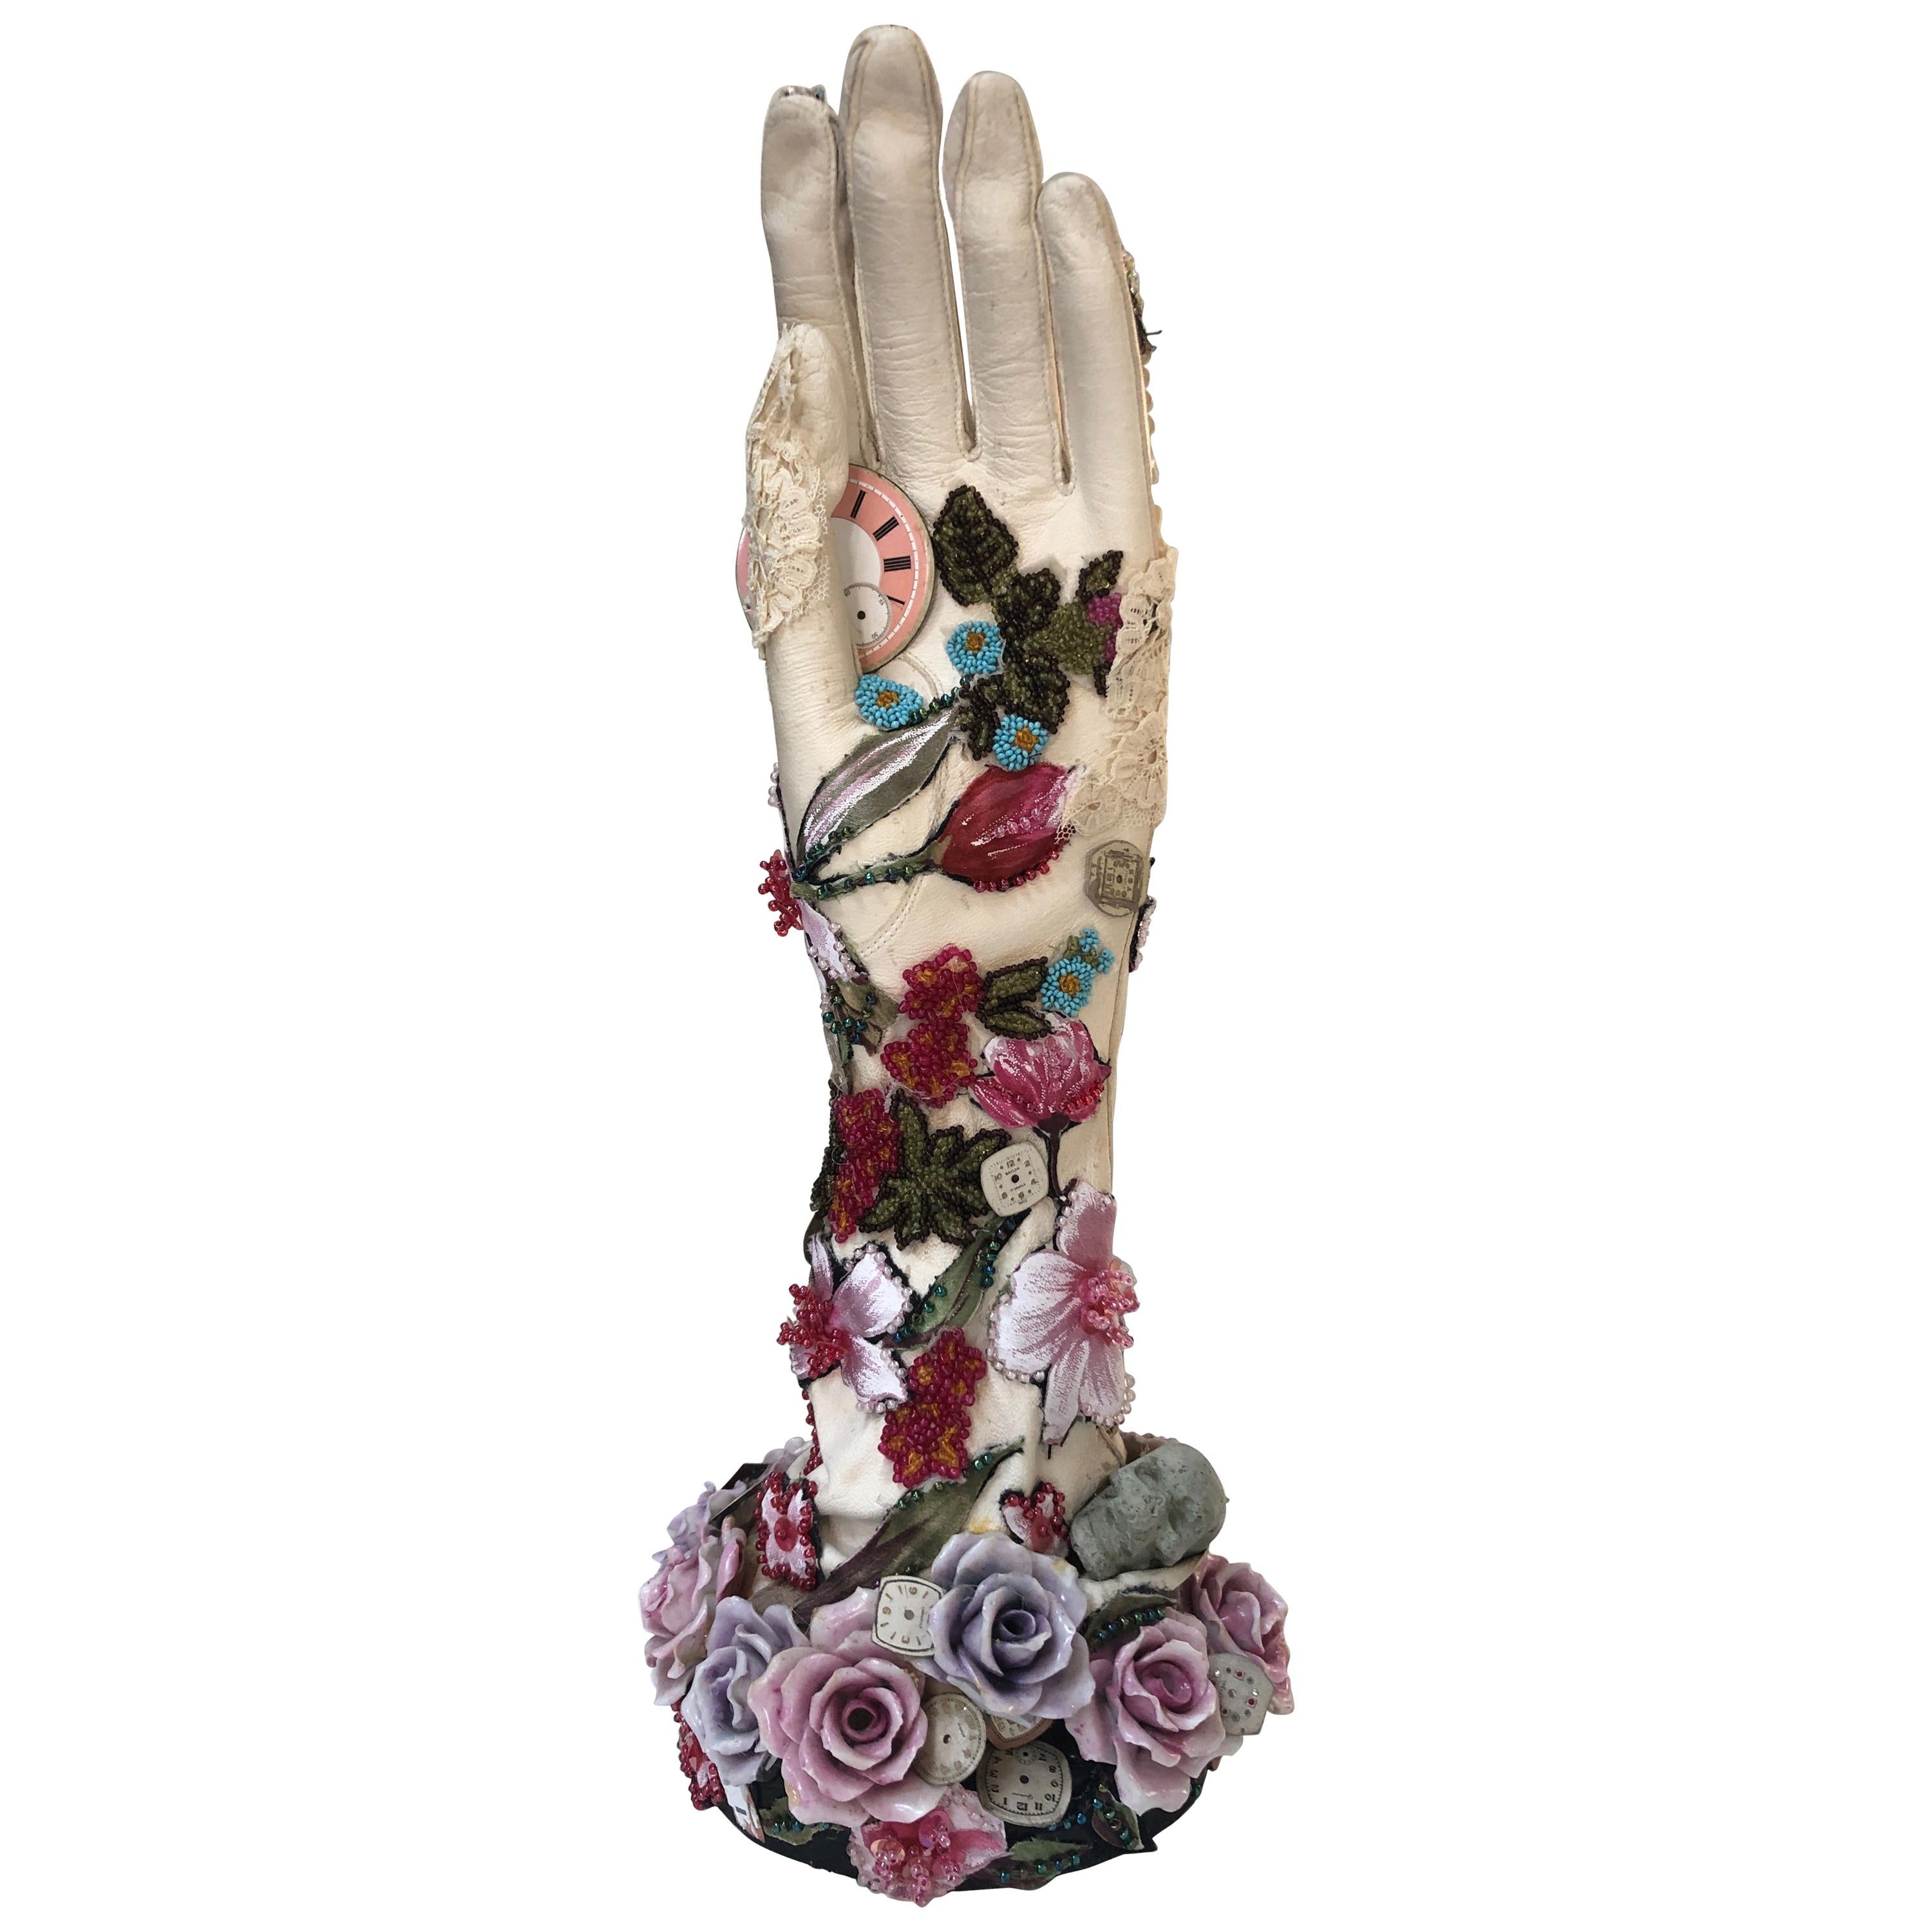 Romantic Mixed-Media Sculpture Titled Hand of Time For Sale